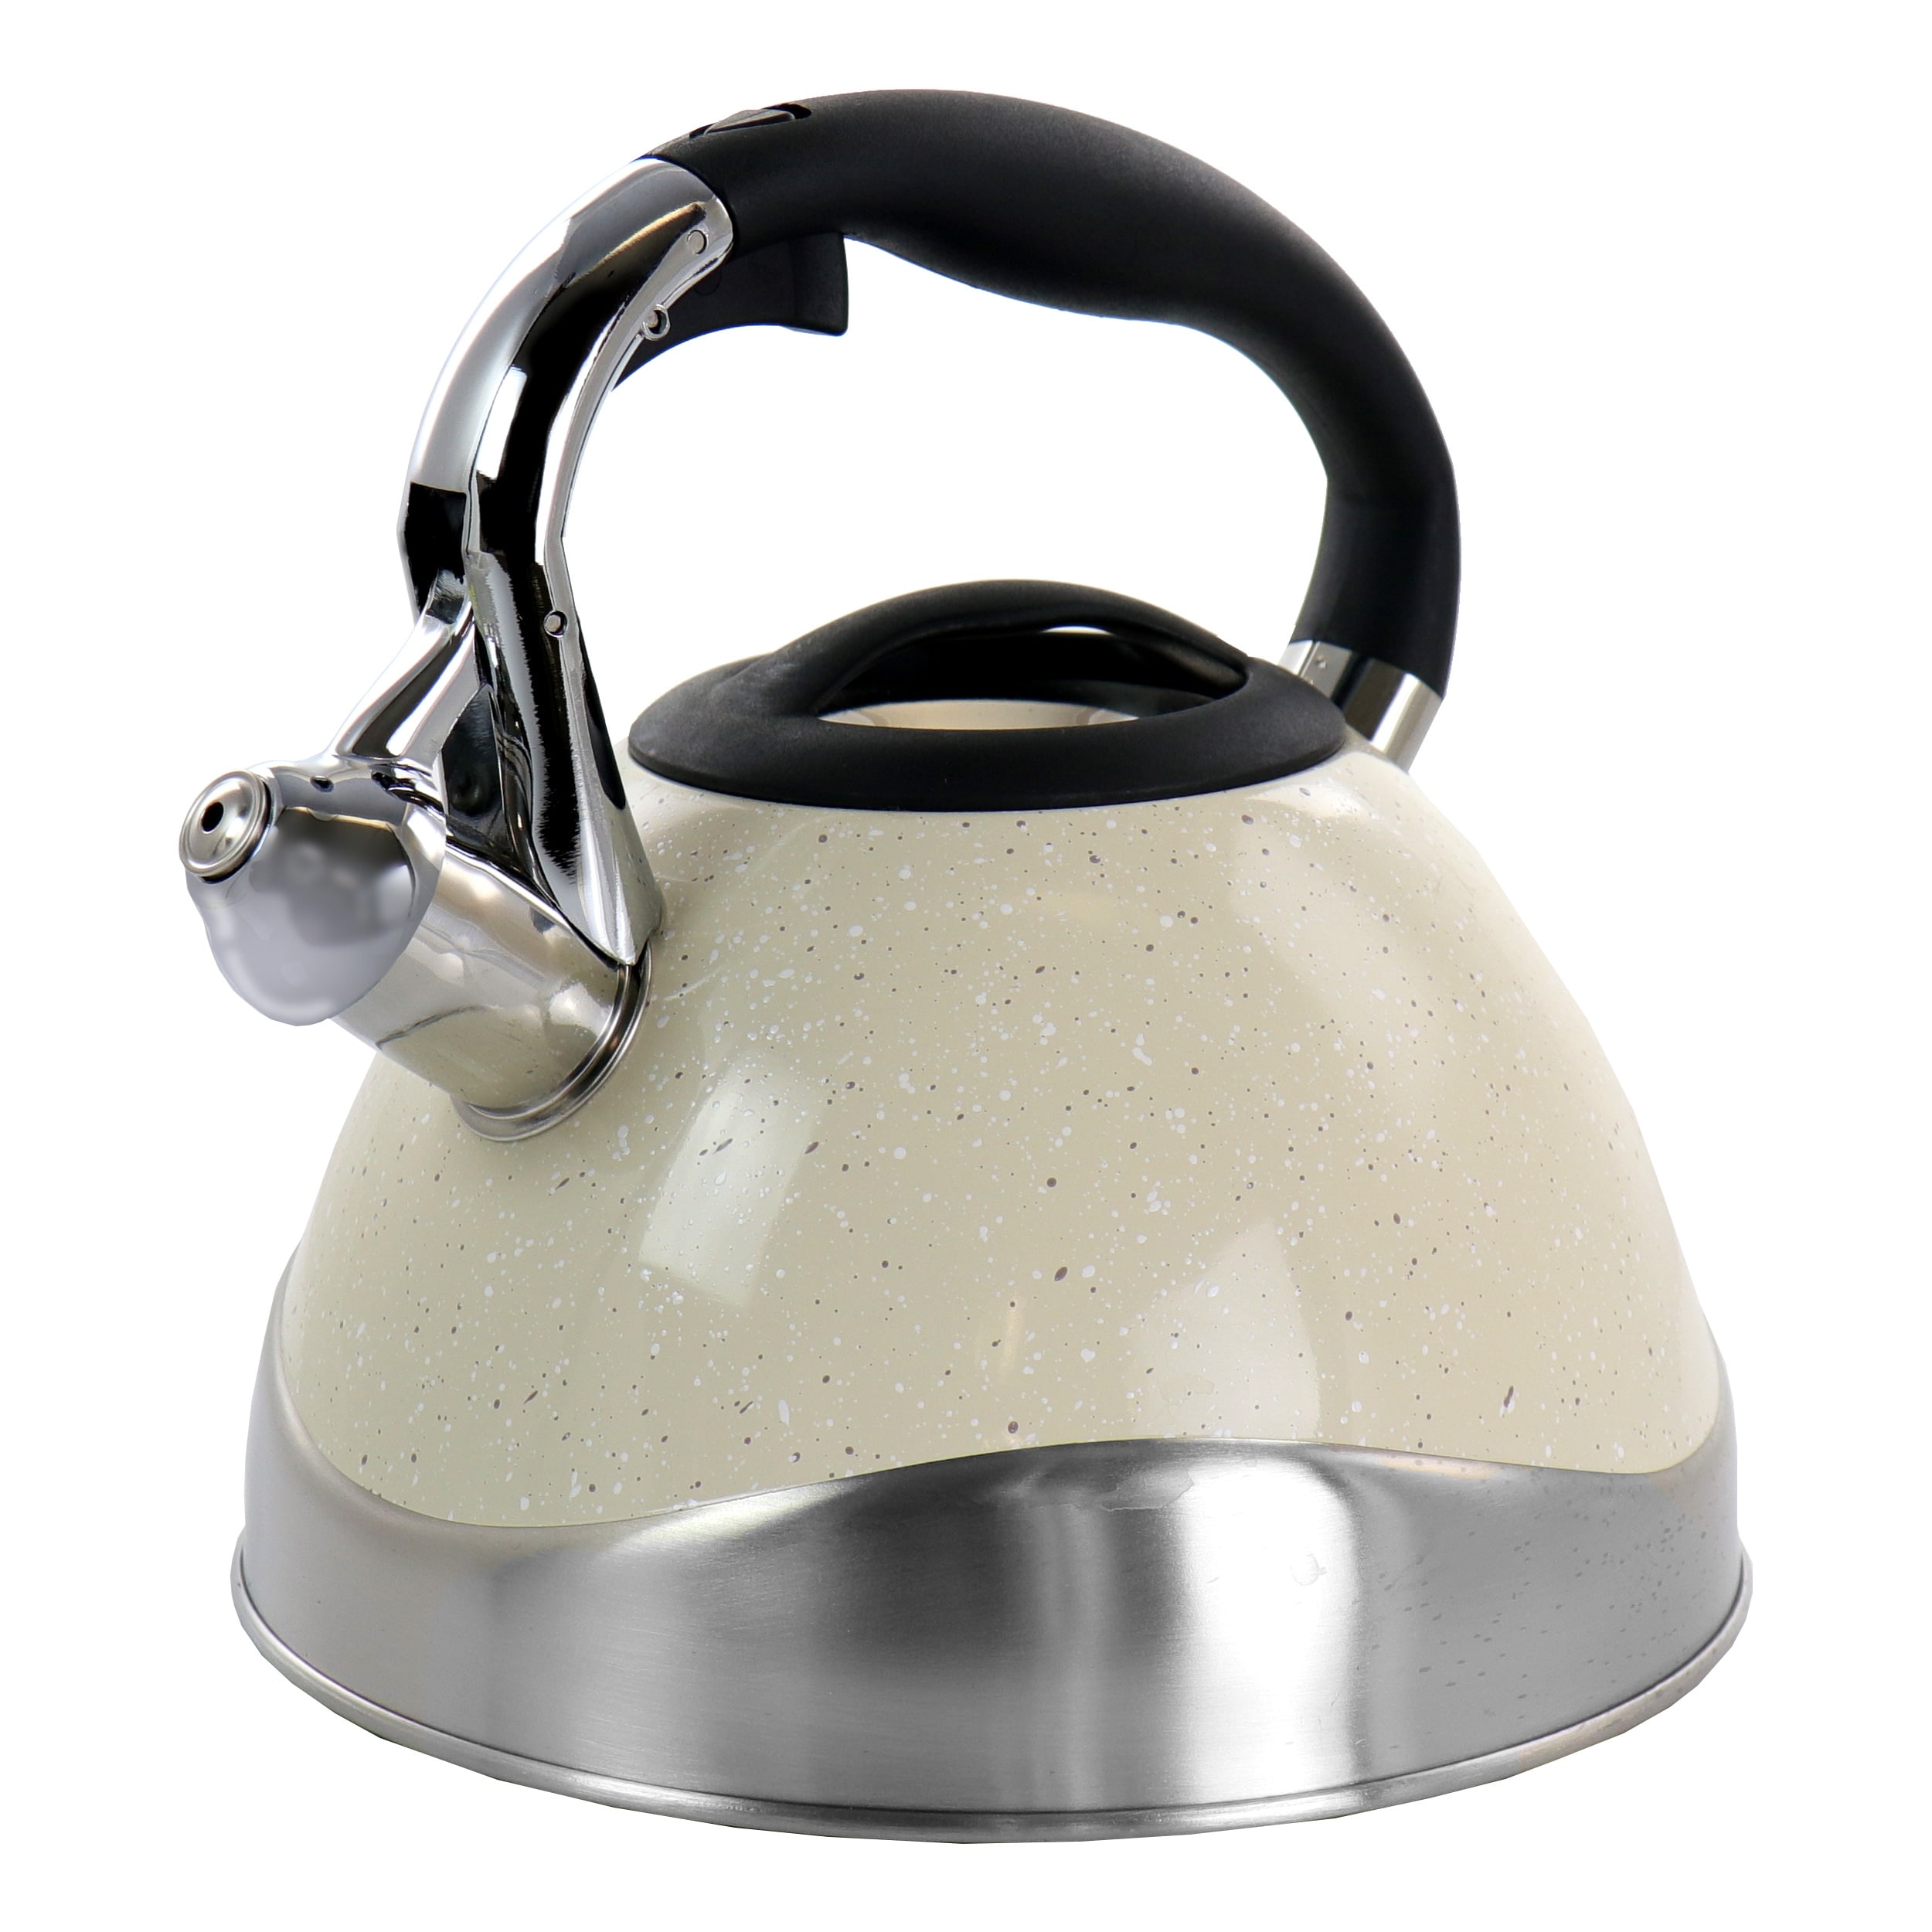 https://ak1.ostkcdn.com/images/products/is/images/direct/9365bcc9374e0b498088ca14817d41fb0f42bafa/MegaChef-3-Liter-Stovetop-Whistling-Kettle-in-Light-Tan-Speckle.jpg